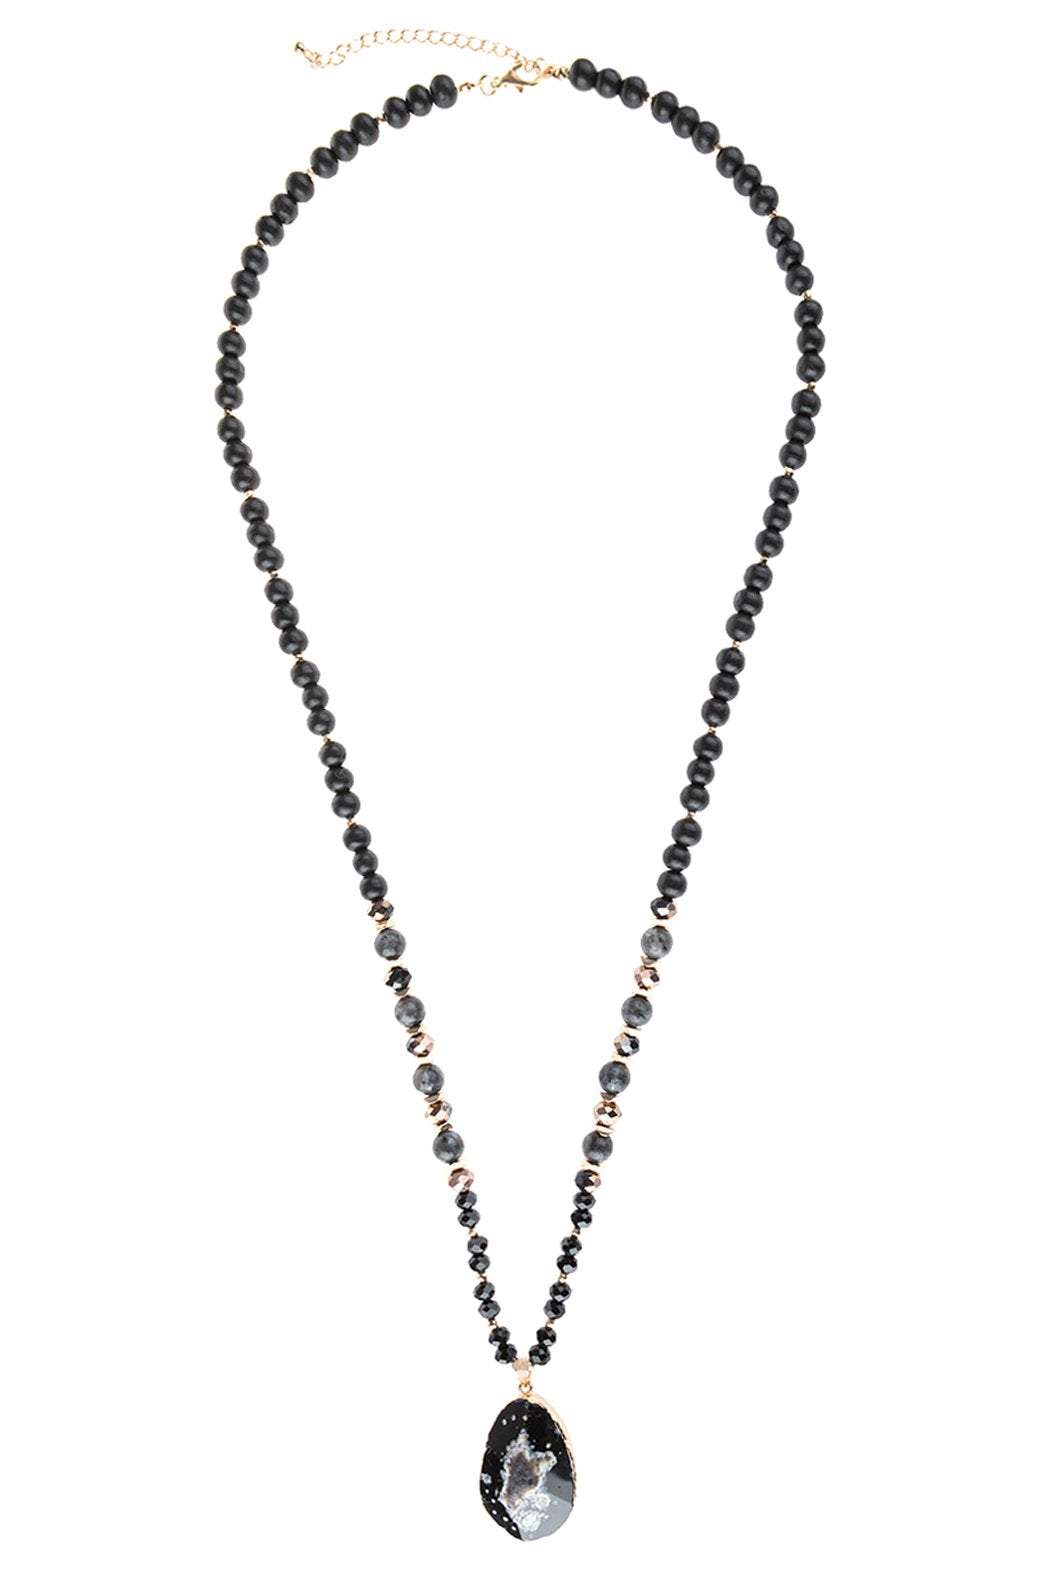 Hdn3029 - Beaded Necklace With Stone Pendant